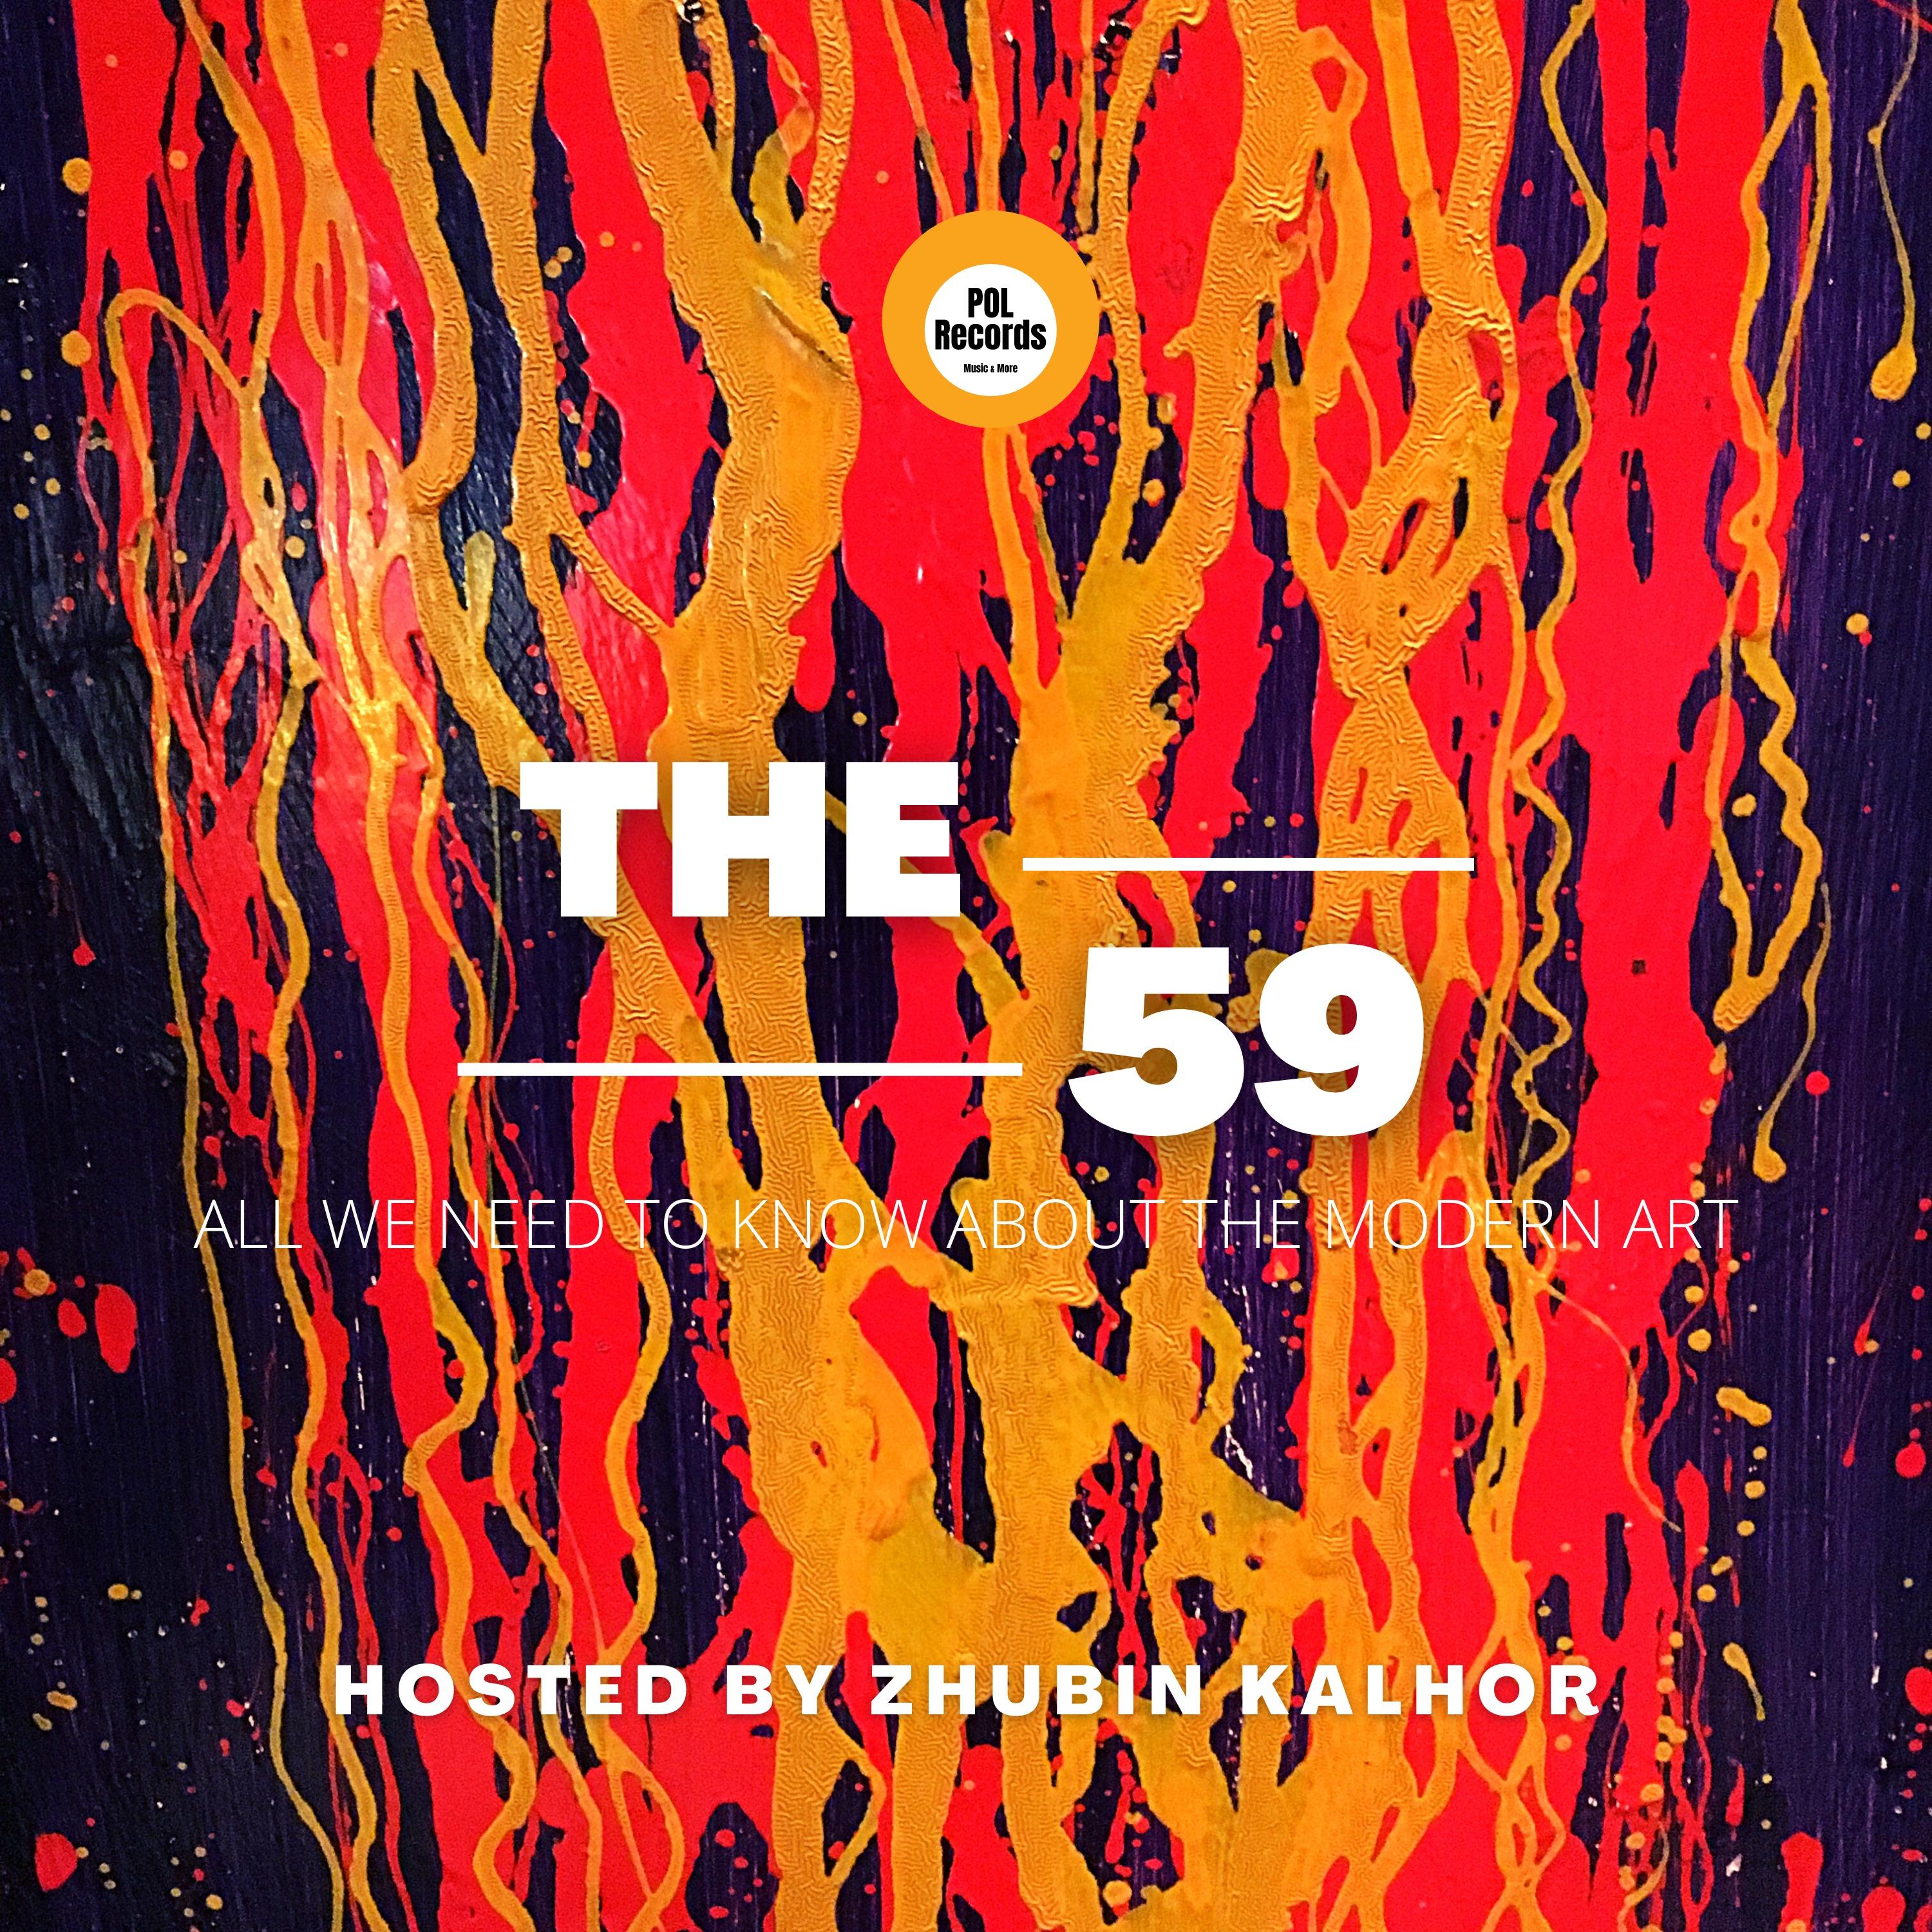 "The 59"